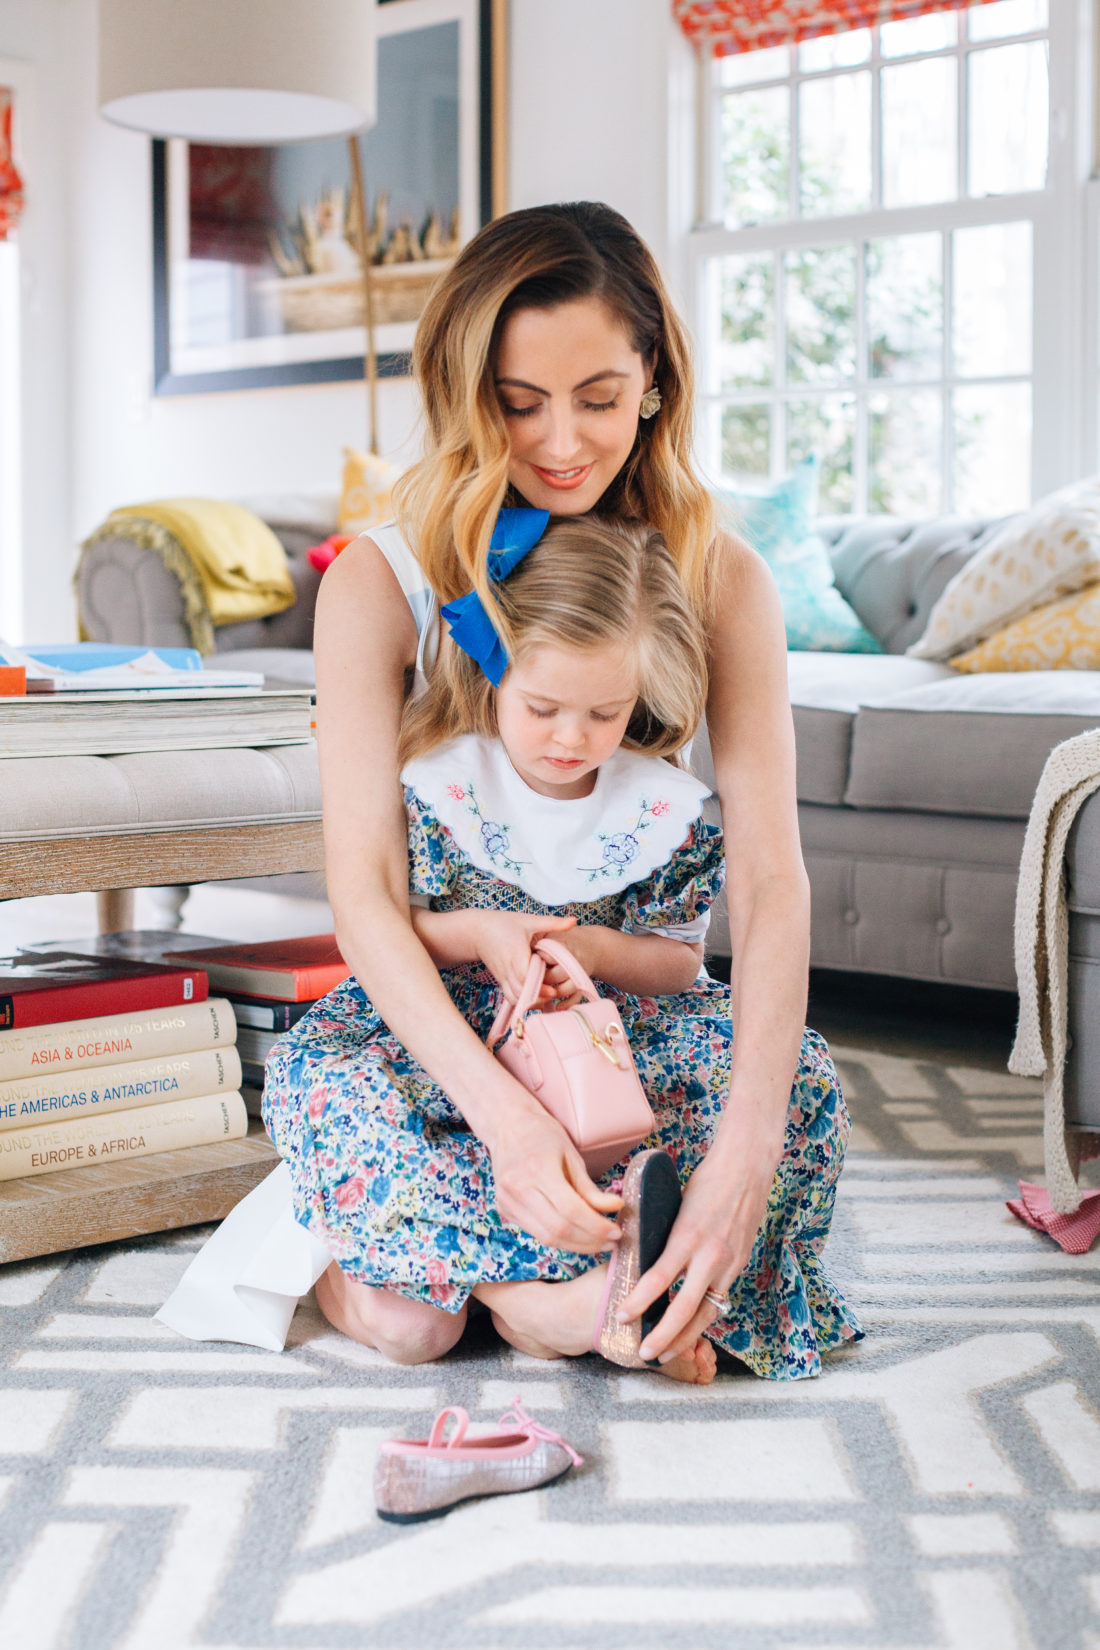 Eva Amurri Martino puts daughter Marlowe's shoes on as they prepare for Easter Sunday